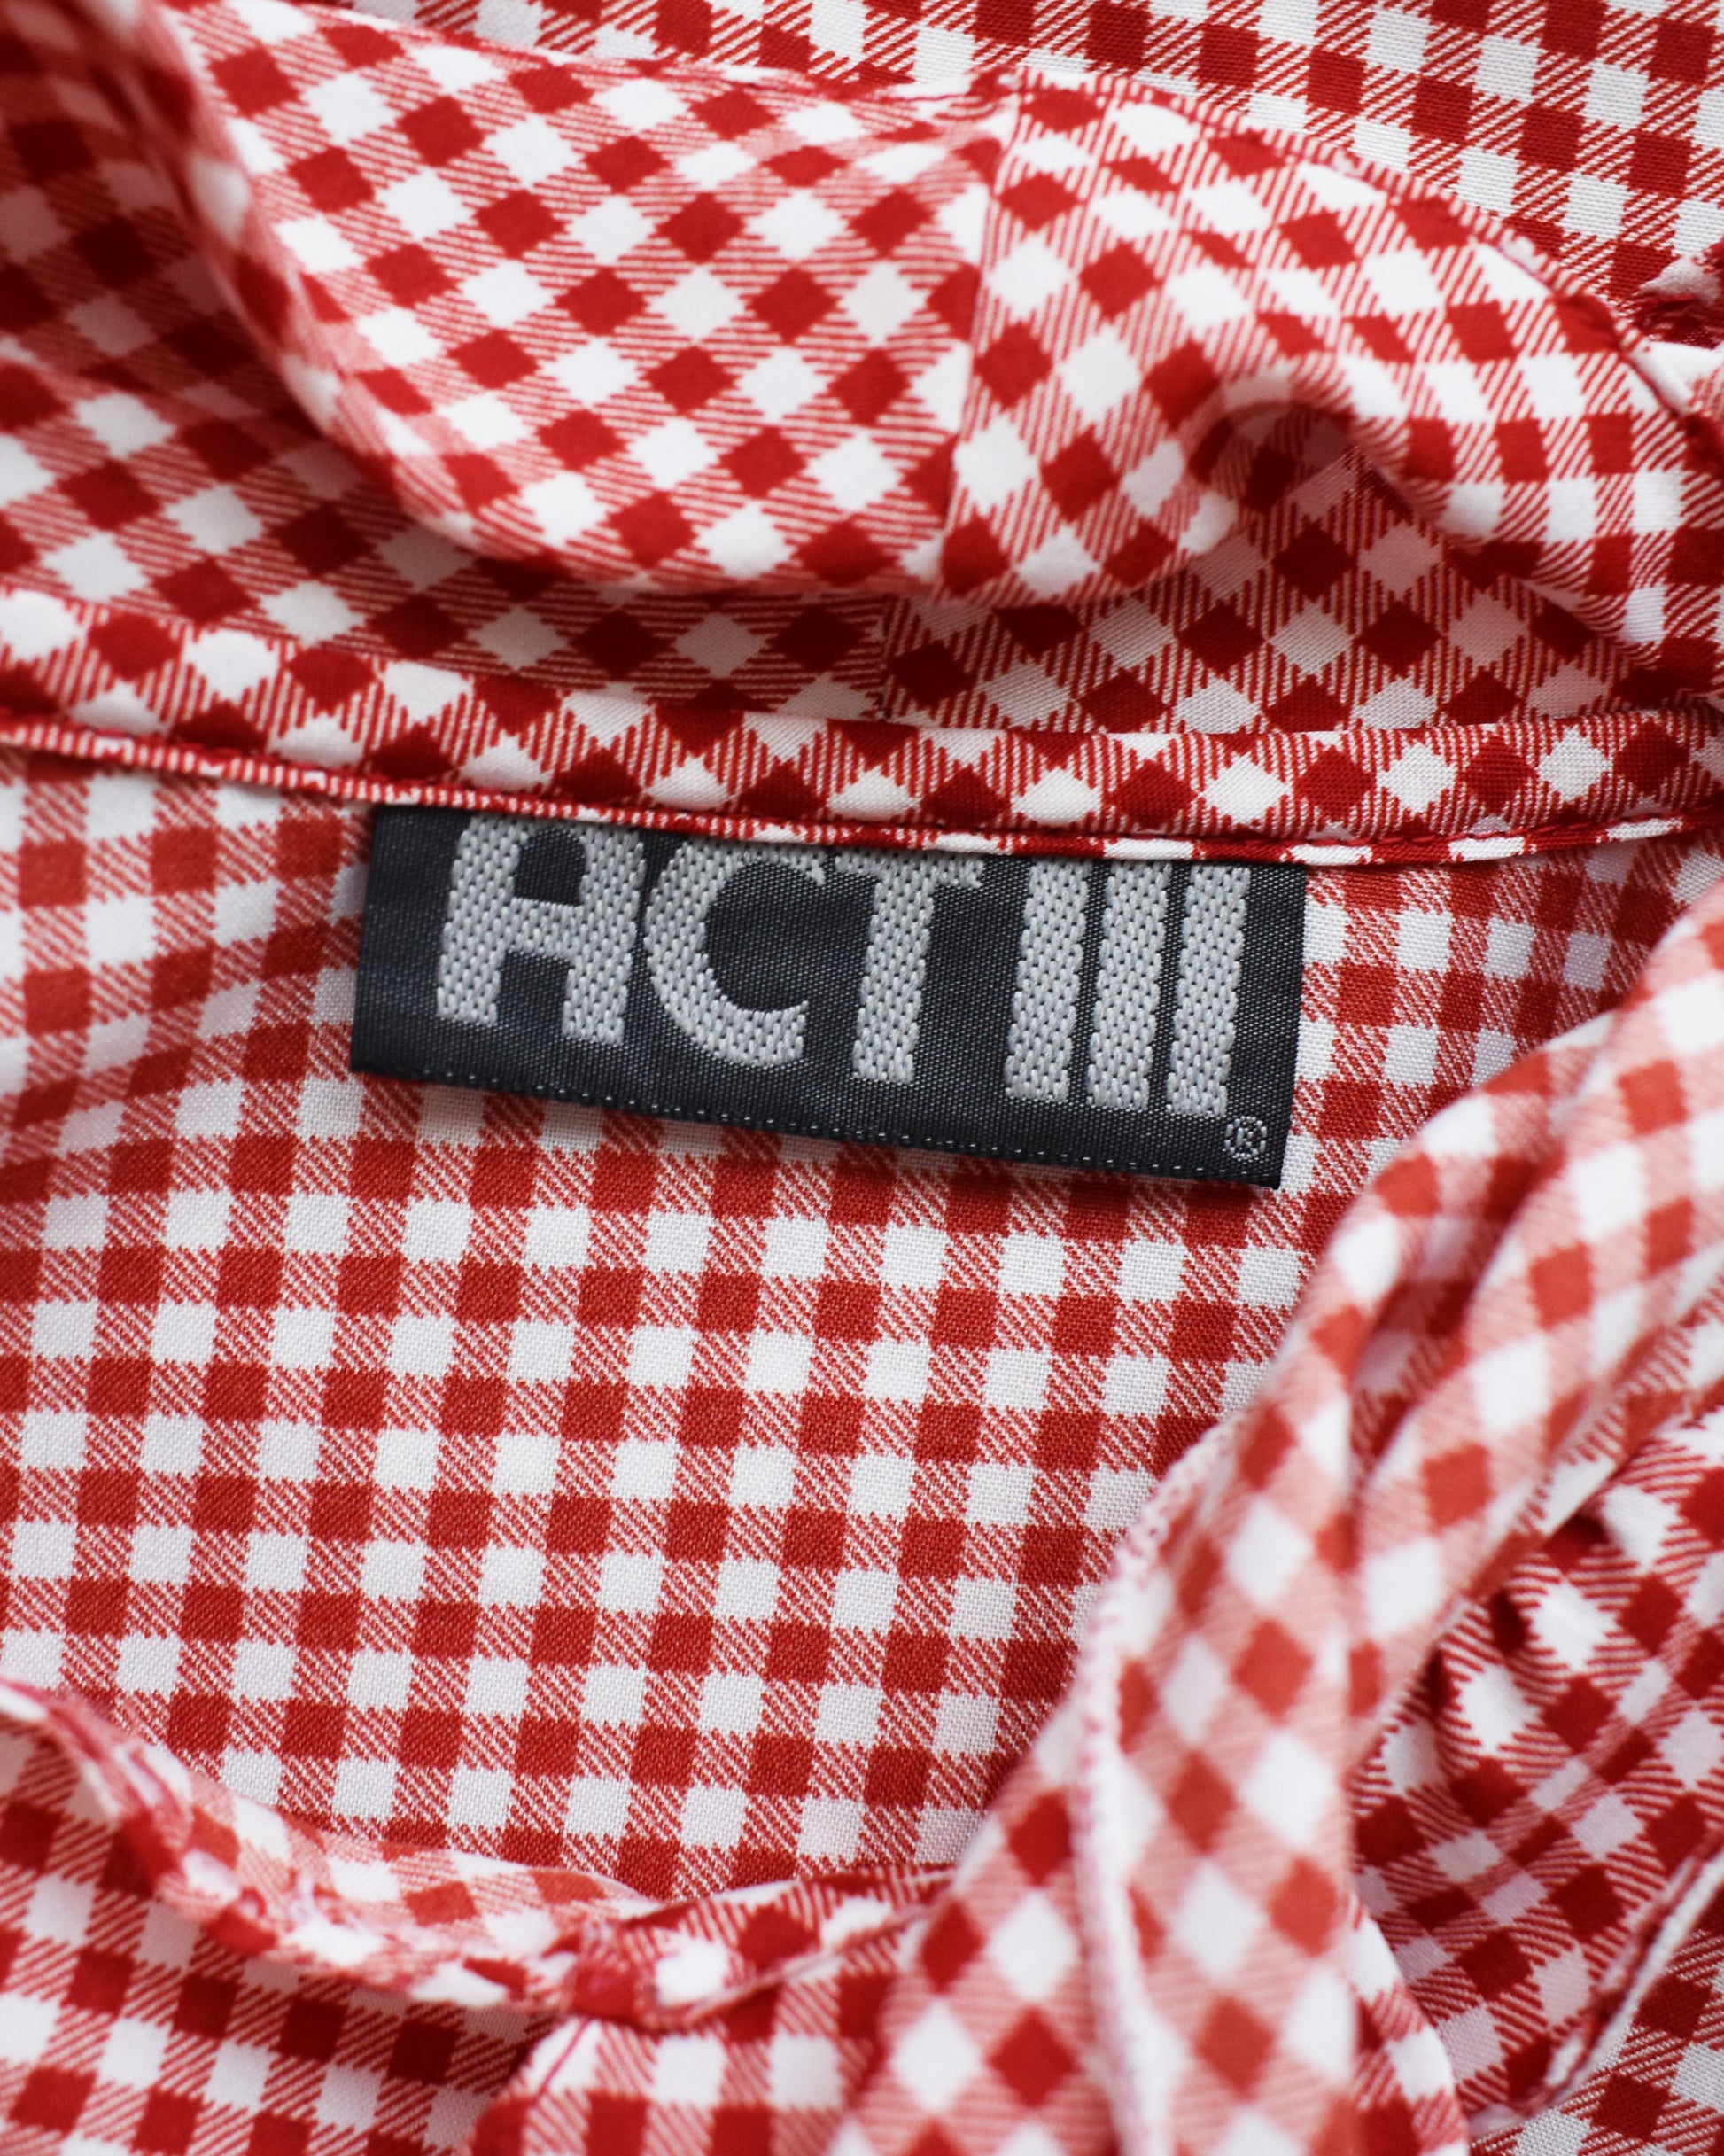 Close up of the tag that says Act III